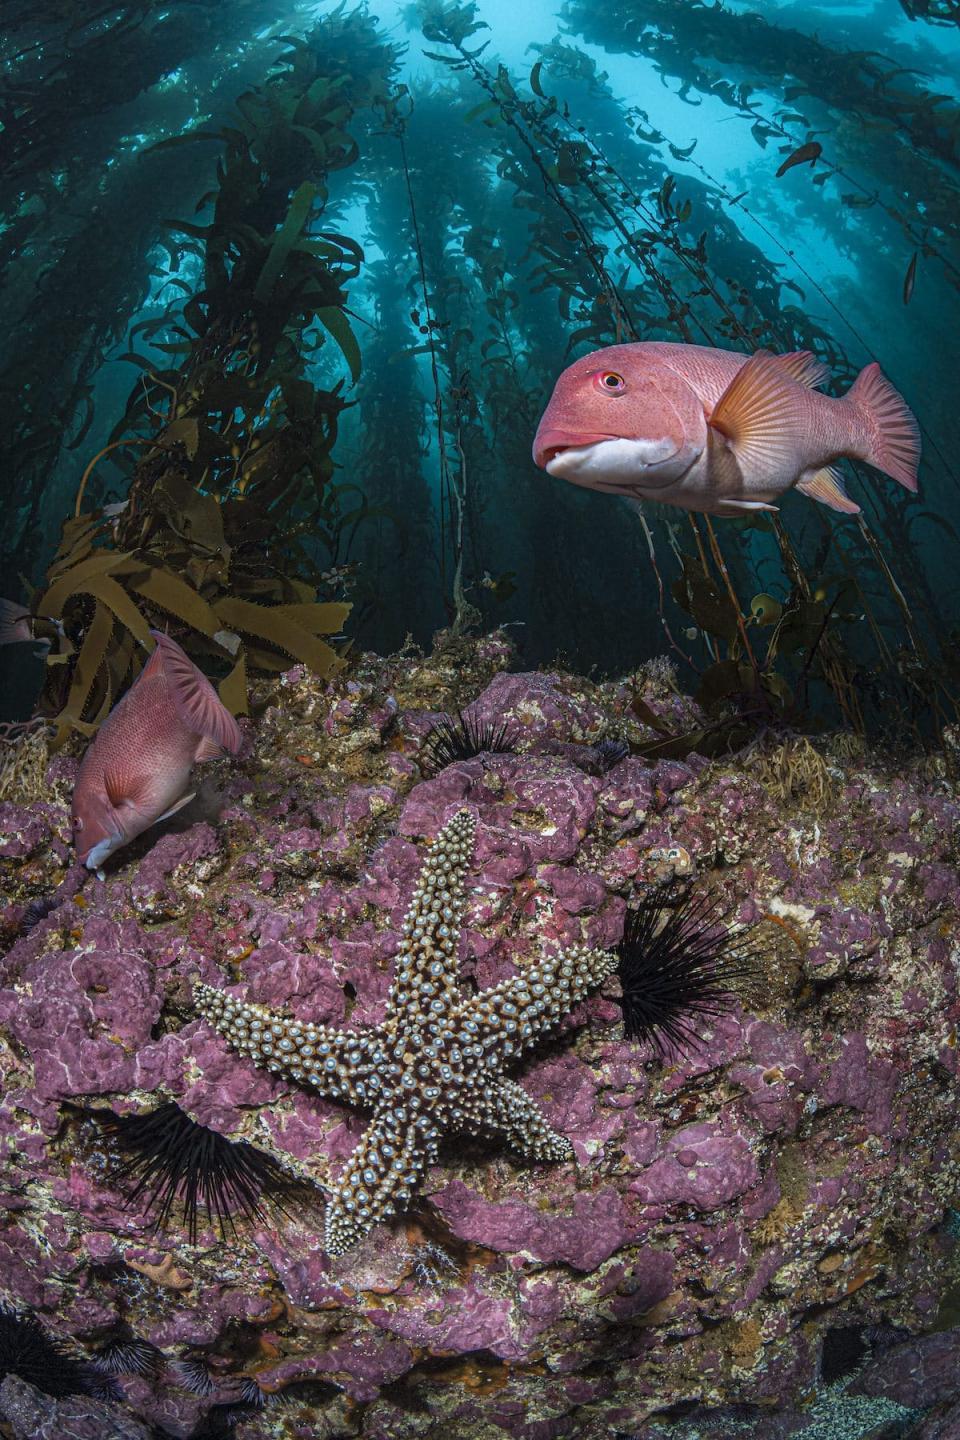 Underwater Seascapes. Photo: Klostermann, 2020 UN World Oceans Day Photo Competition 